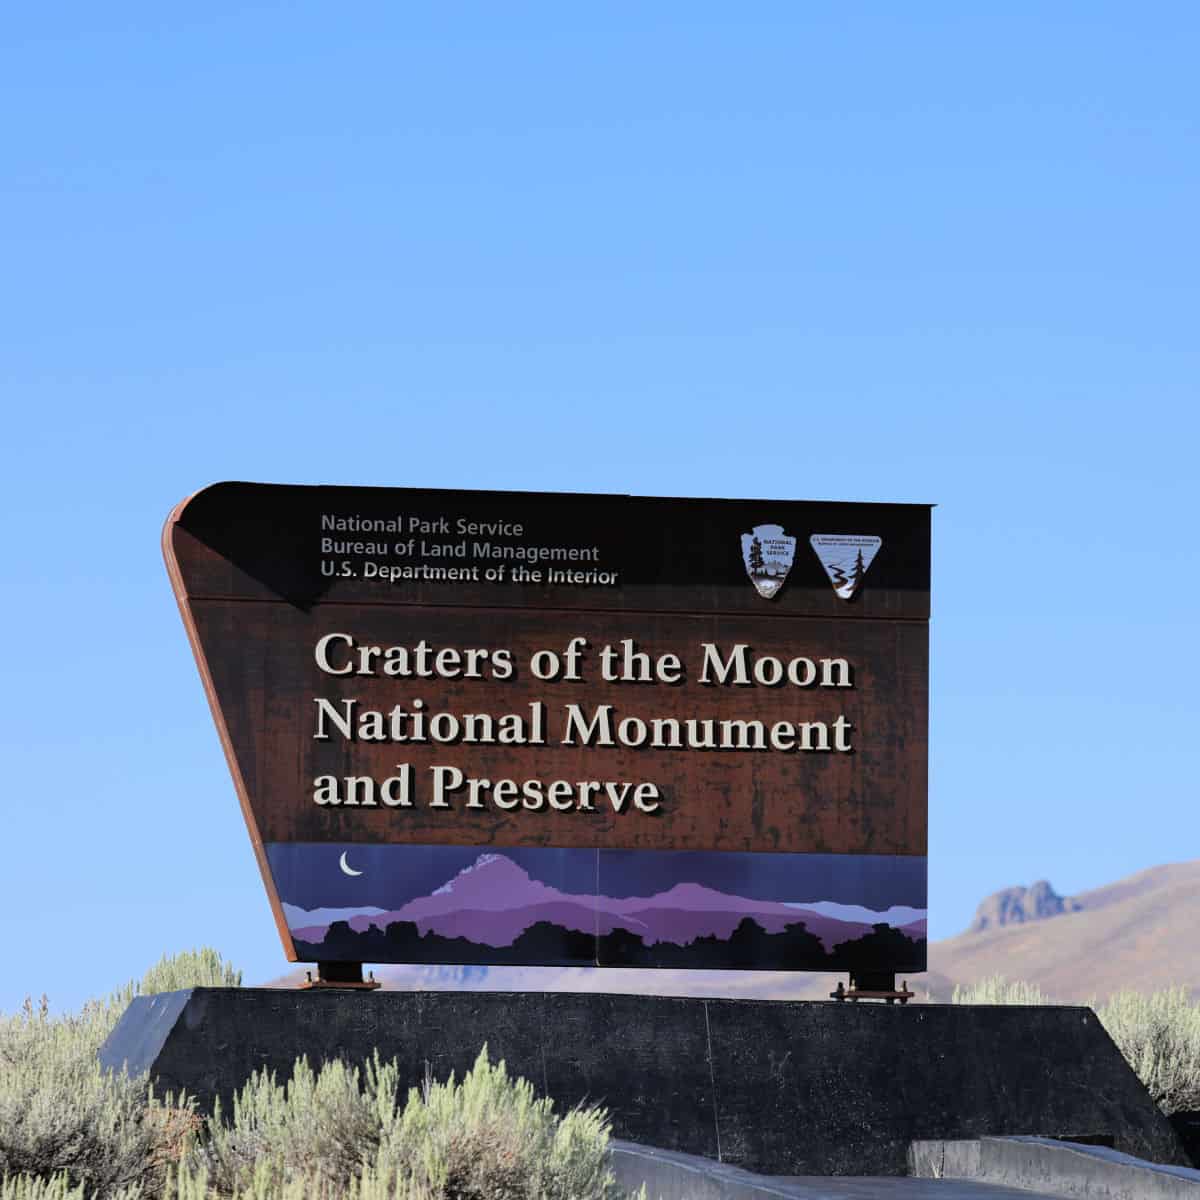 Entrance sign for Craters of the Moon National Monument